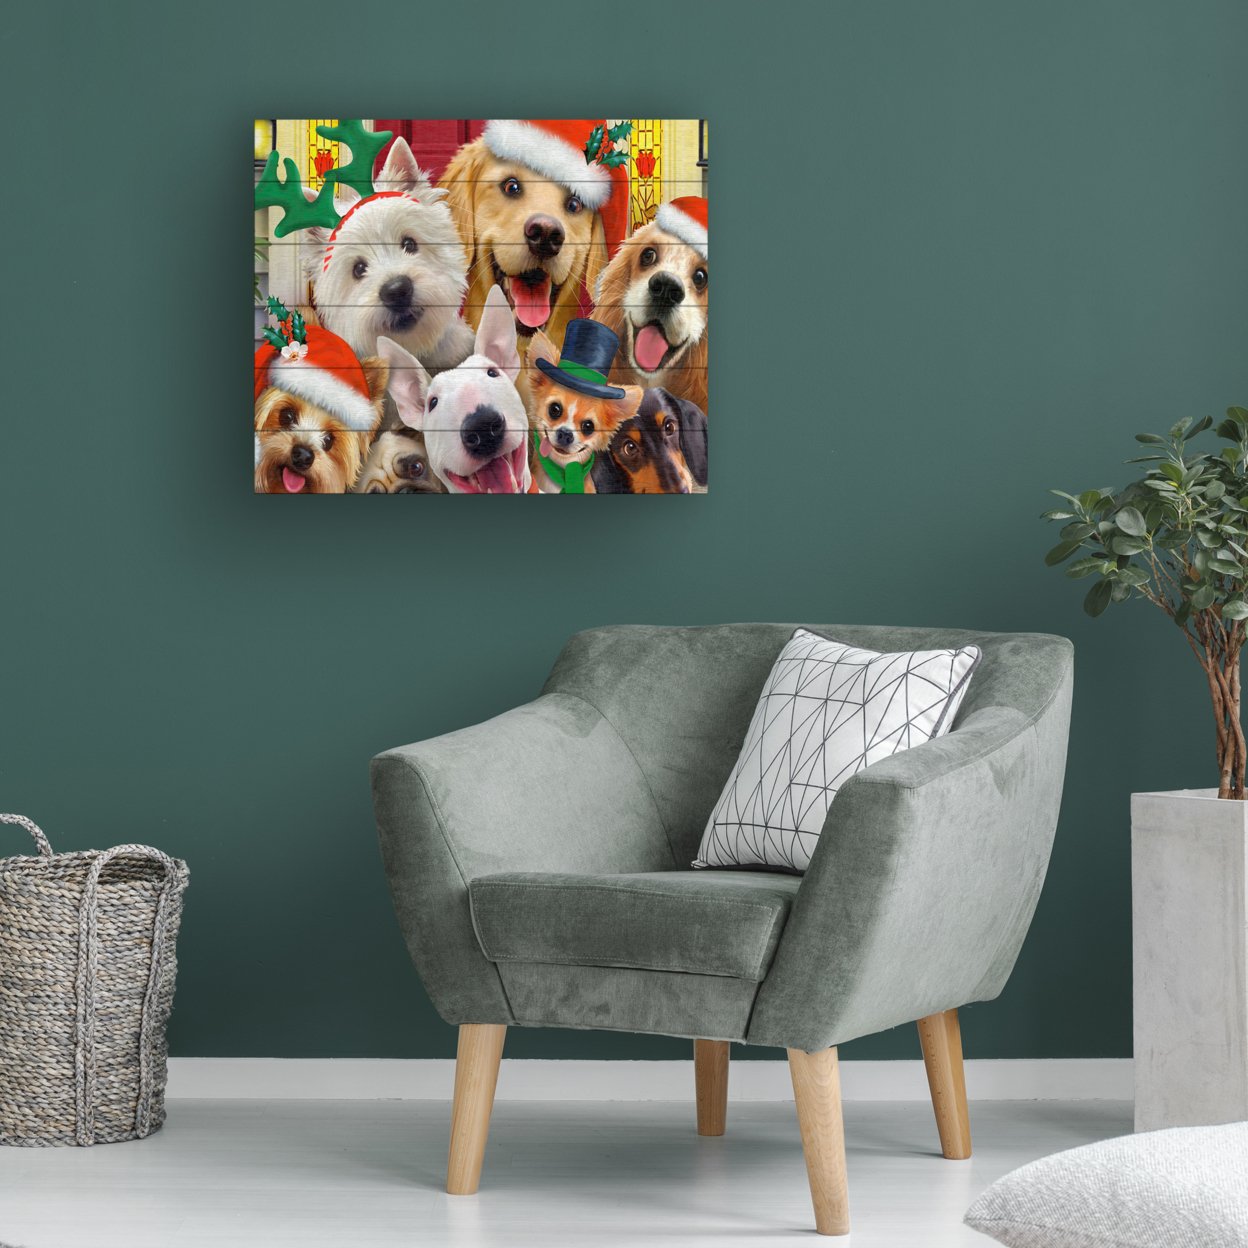 Wooden Slat Art 18 X 22 Inches Titled Christmas Dogs Ready To Hang Home Decor Picture